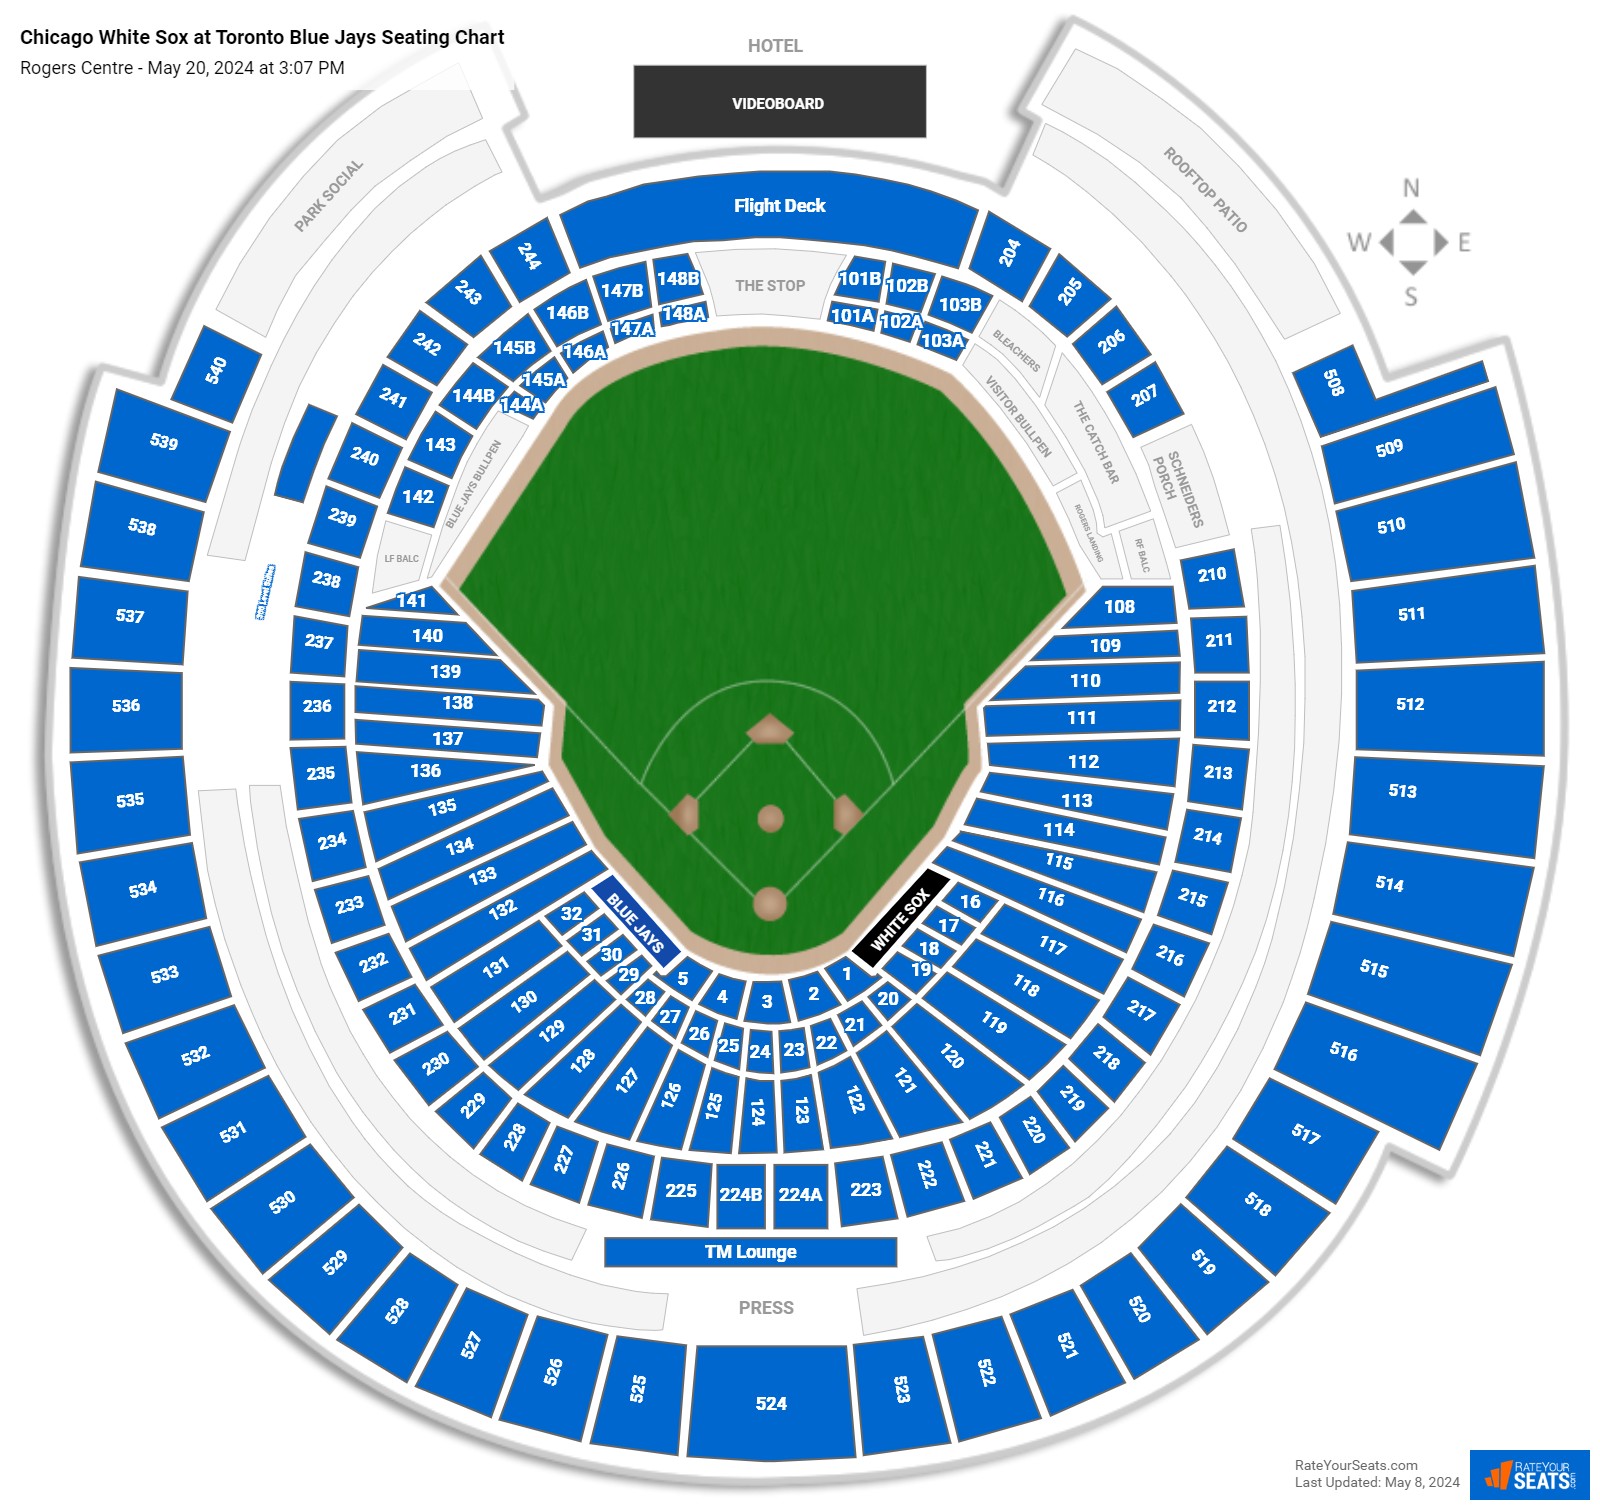 Chicago White Sox at Toronto Blue Jays seating chart Rogers Centre